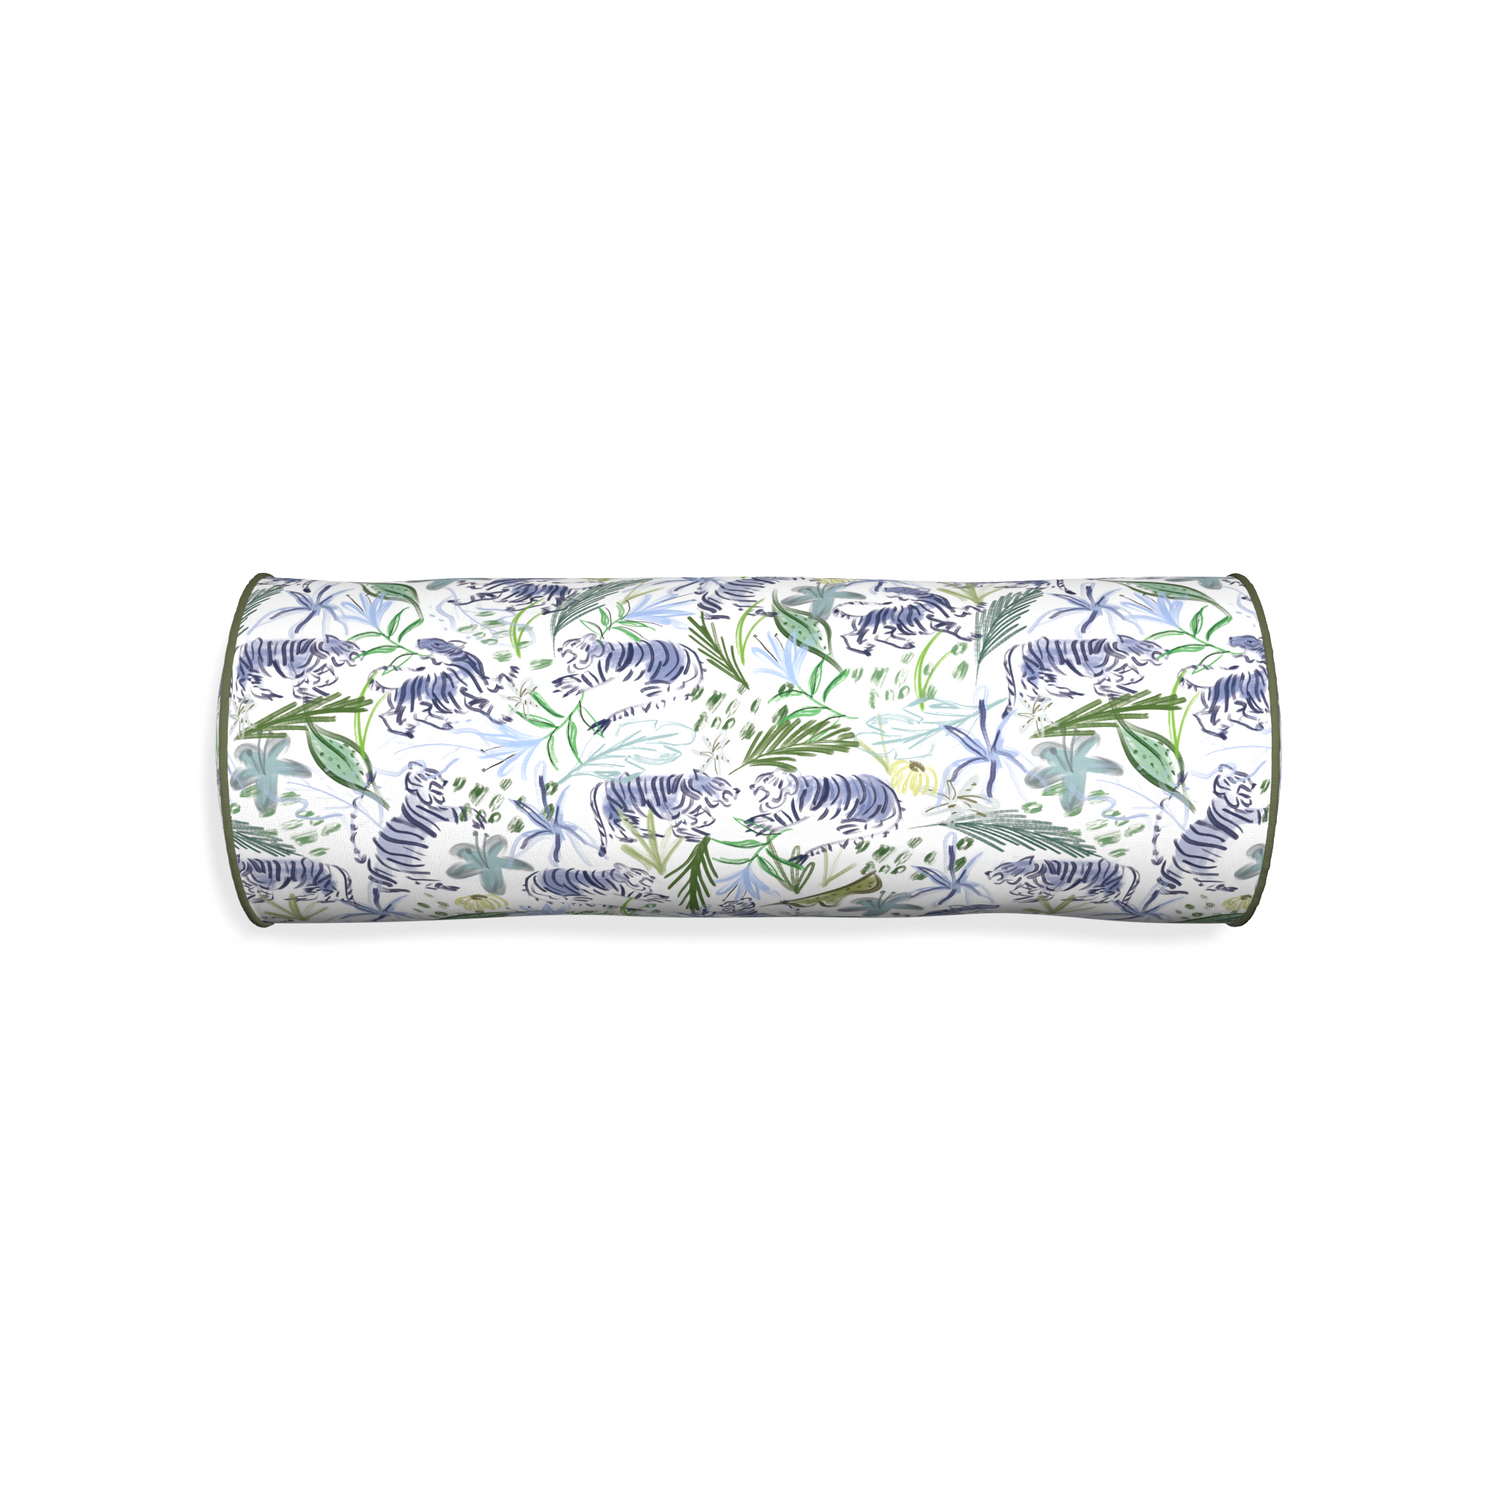 Bolster frida green custom green tigerpillow with f piping on white background